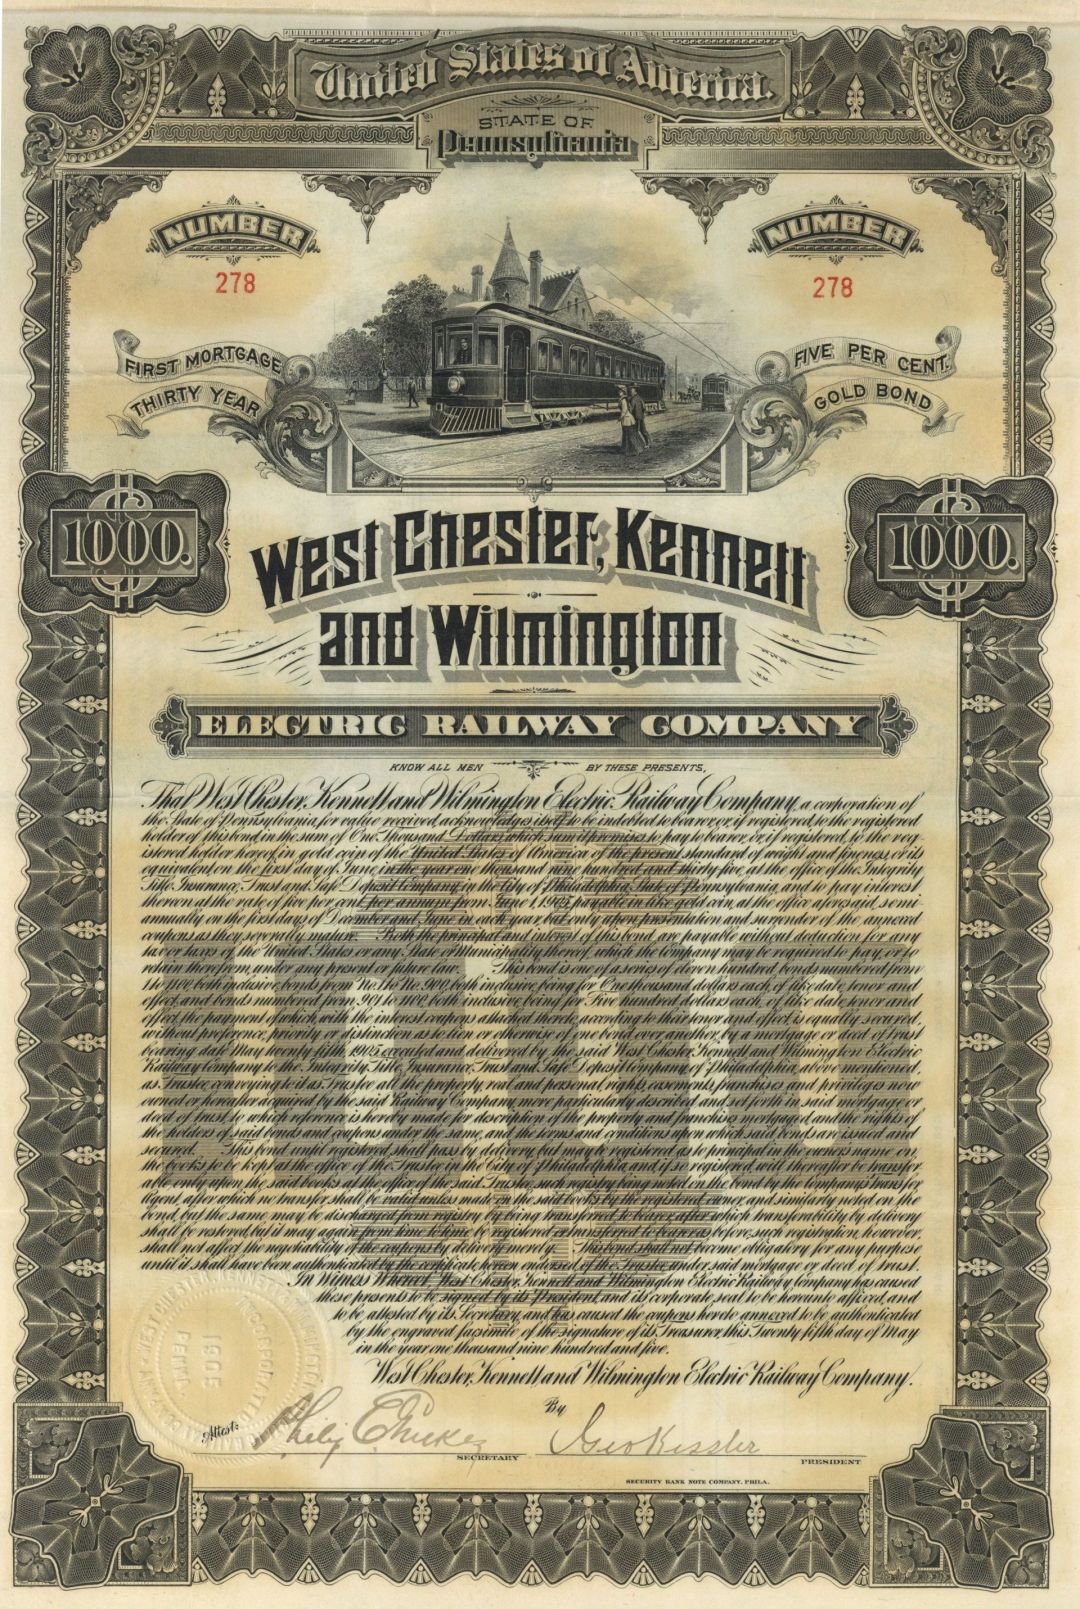 West Chester, Kennett and Wilmington Electric Railway Co. - 1905 dated $1000 Railroad Bond